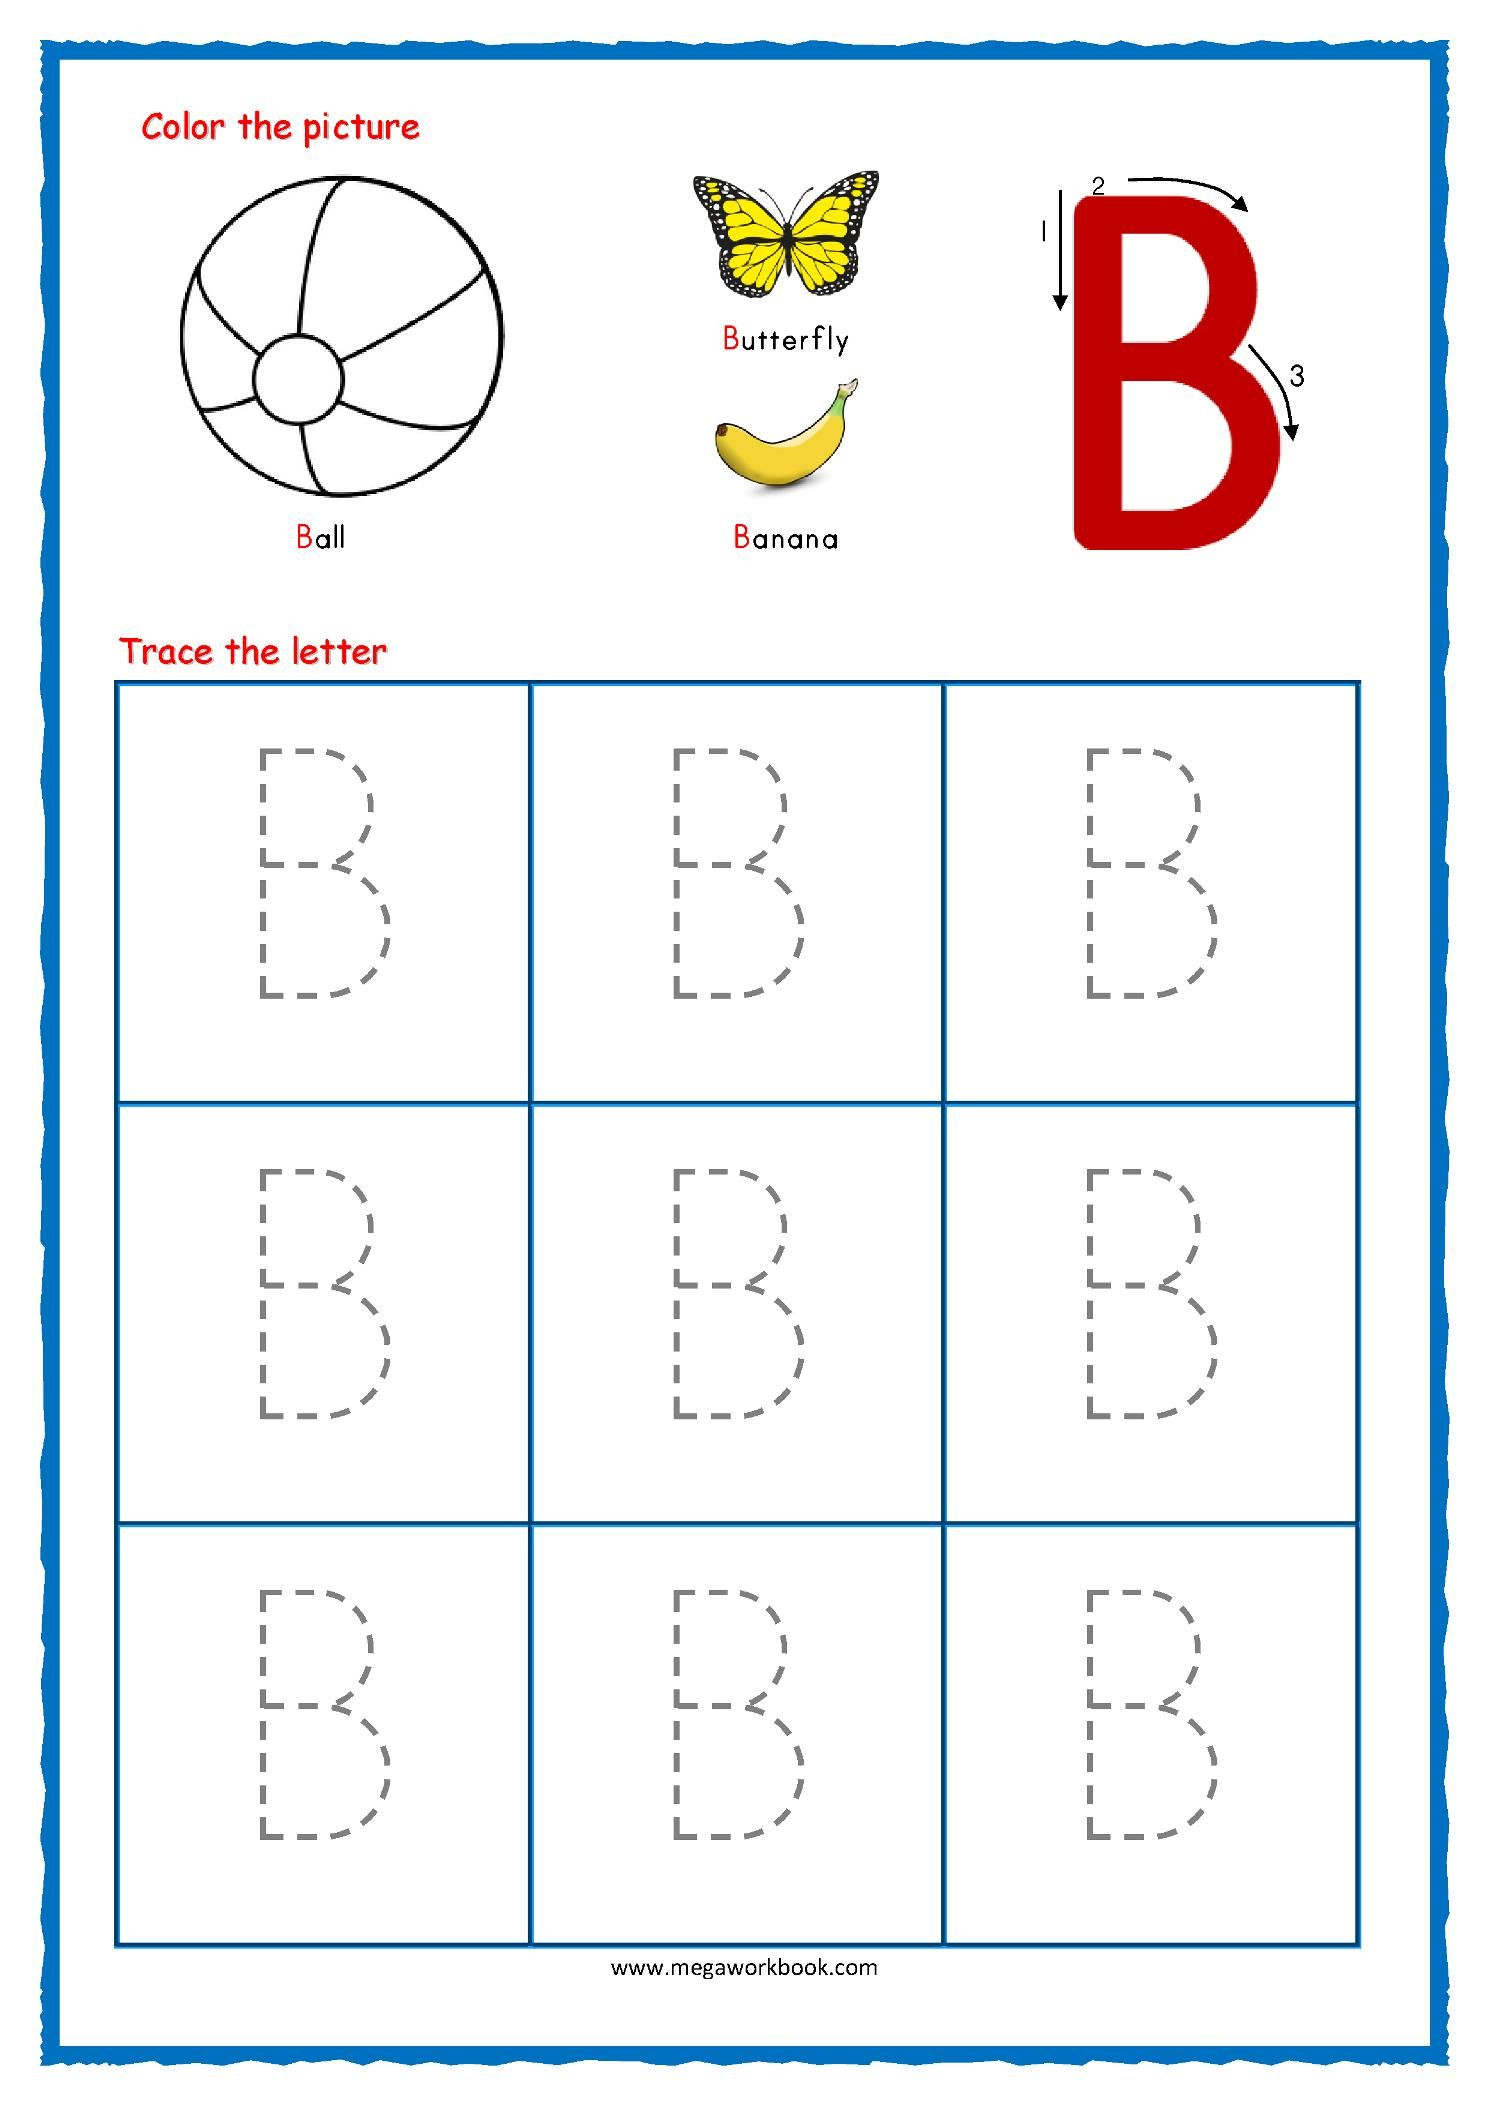 Printable Worksheets Alphabet Tracing In 2020 | Alphabet